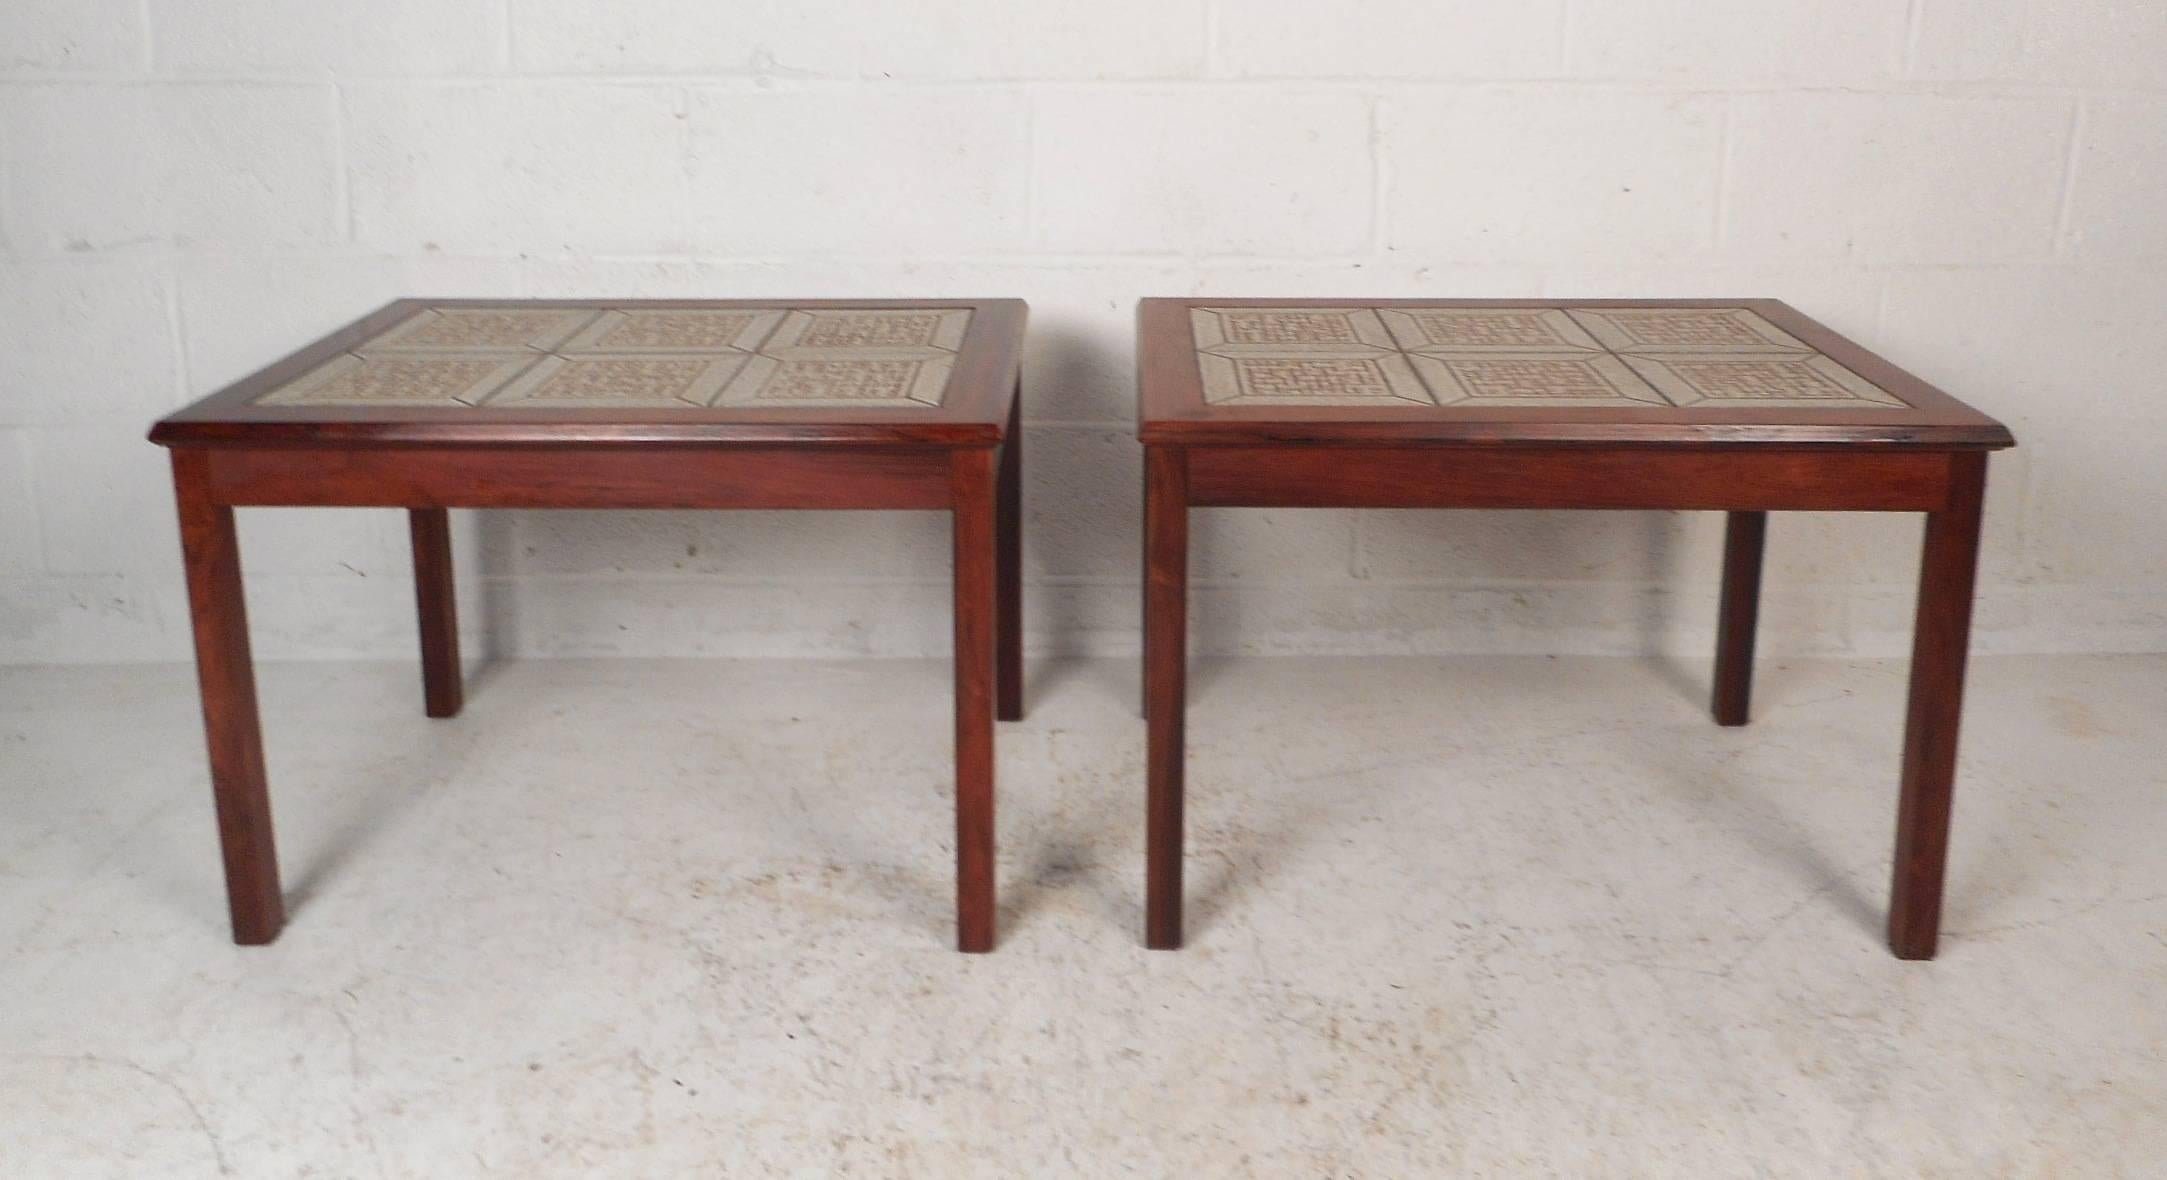 Pair of Danish Midcentury Rosewood Tile Top End Tables In Good Condition For Sale In Brooklyn, NY